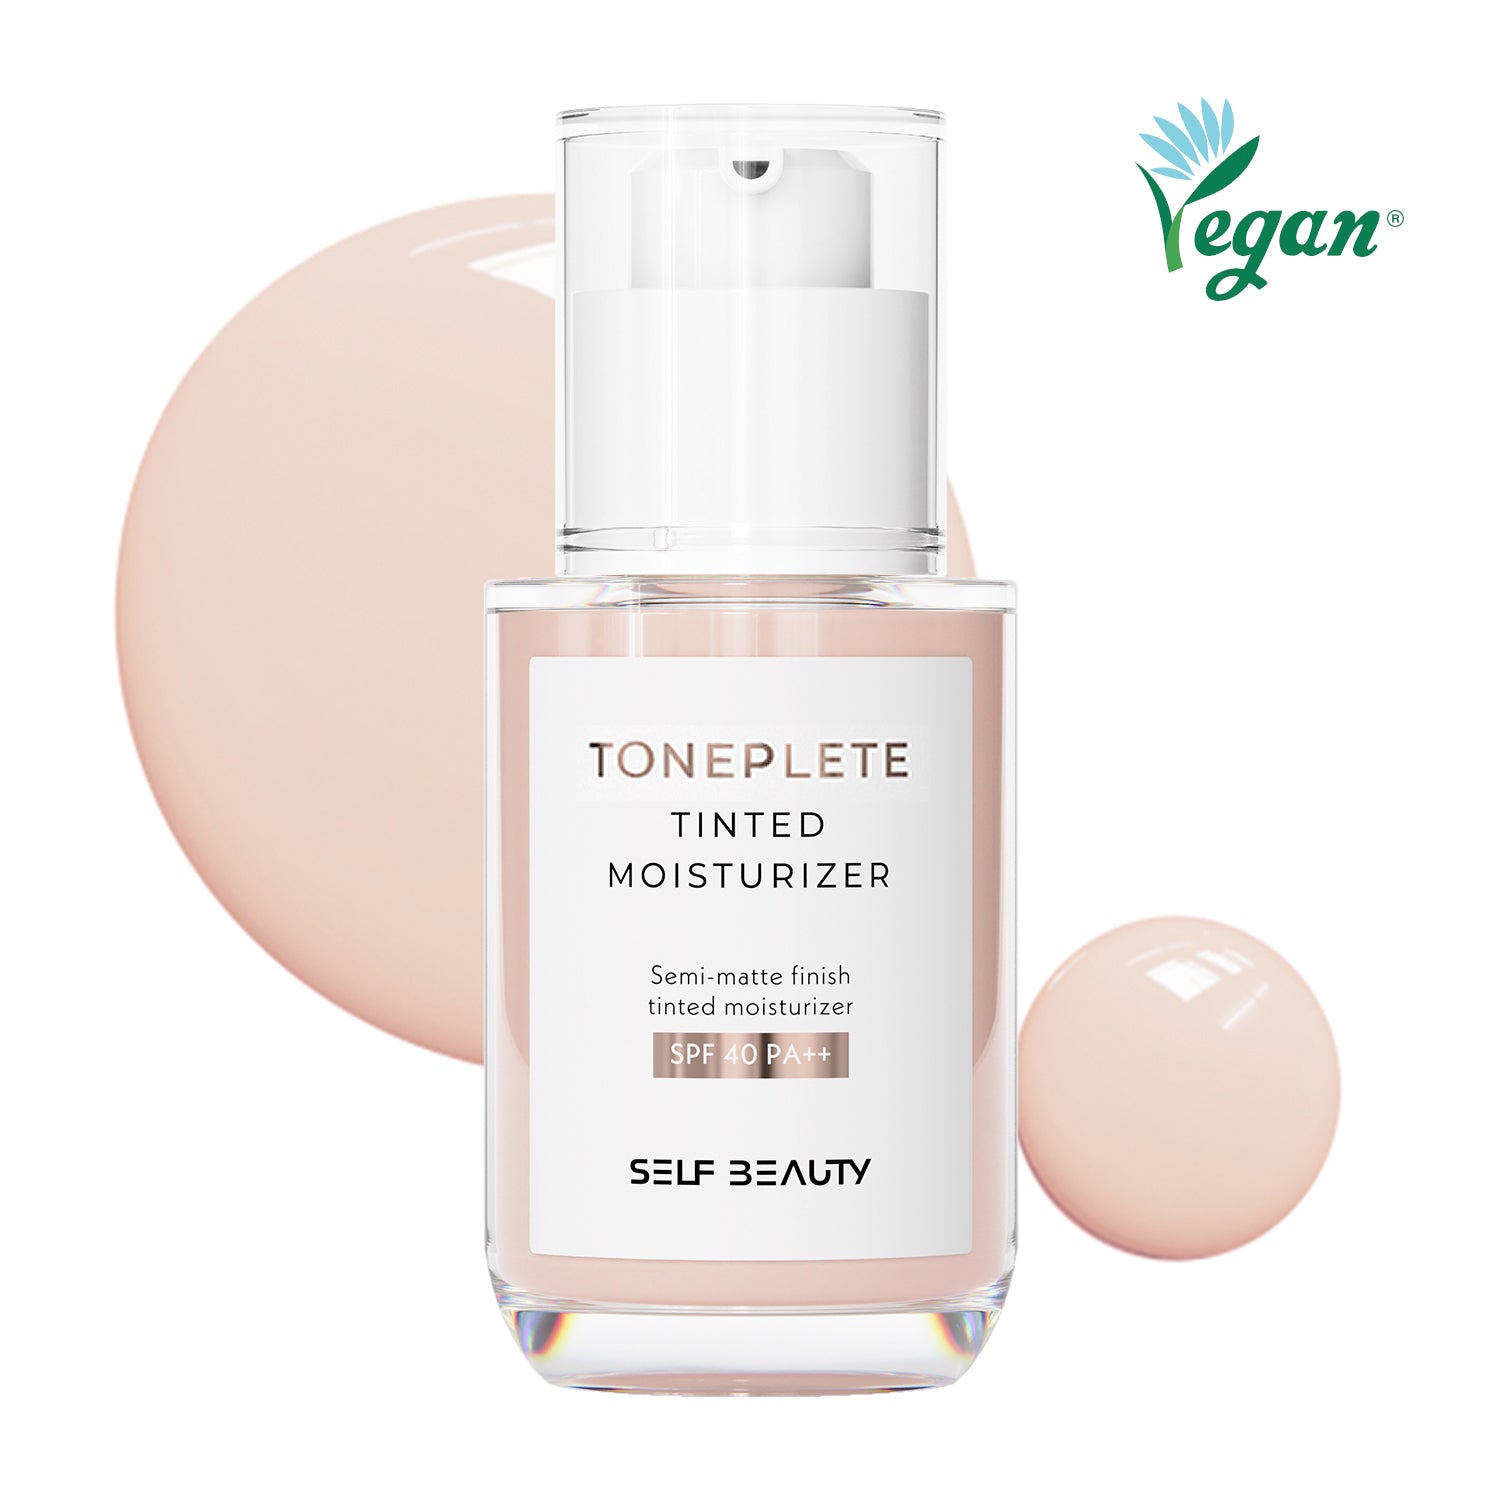 Toneplete Tinted Moisturizer Serum for Face with SPF 40, Tinted Mineral Sunscreen Moisturizer, Vegan, Cruelty-free 33ml - SELF BEAUTY